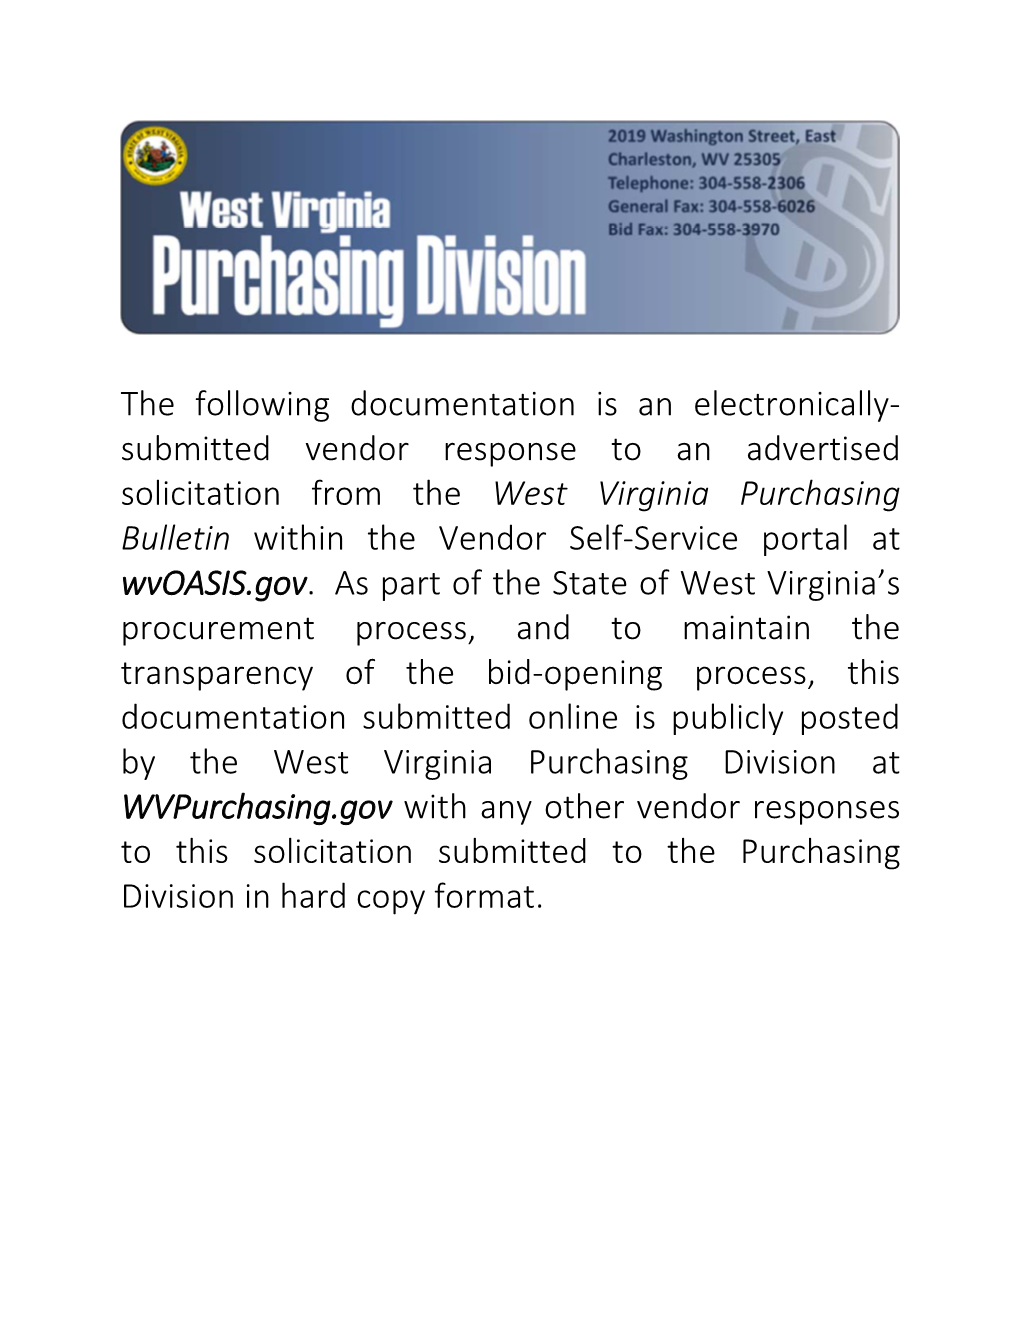 Submitted Vendor Response to an Advertised Solicitation from the West Virginia Purchasing Bulletin Within the Vendor Self‐Service Portal at Wvoasis.Gov